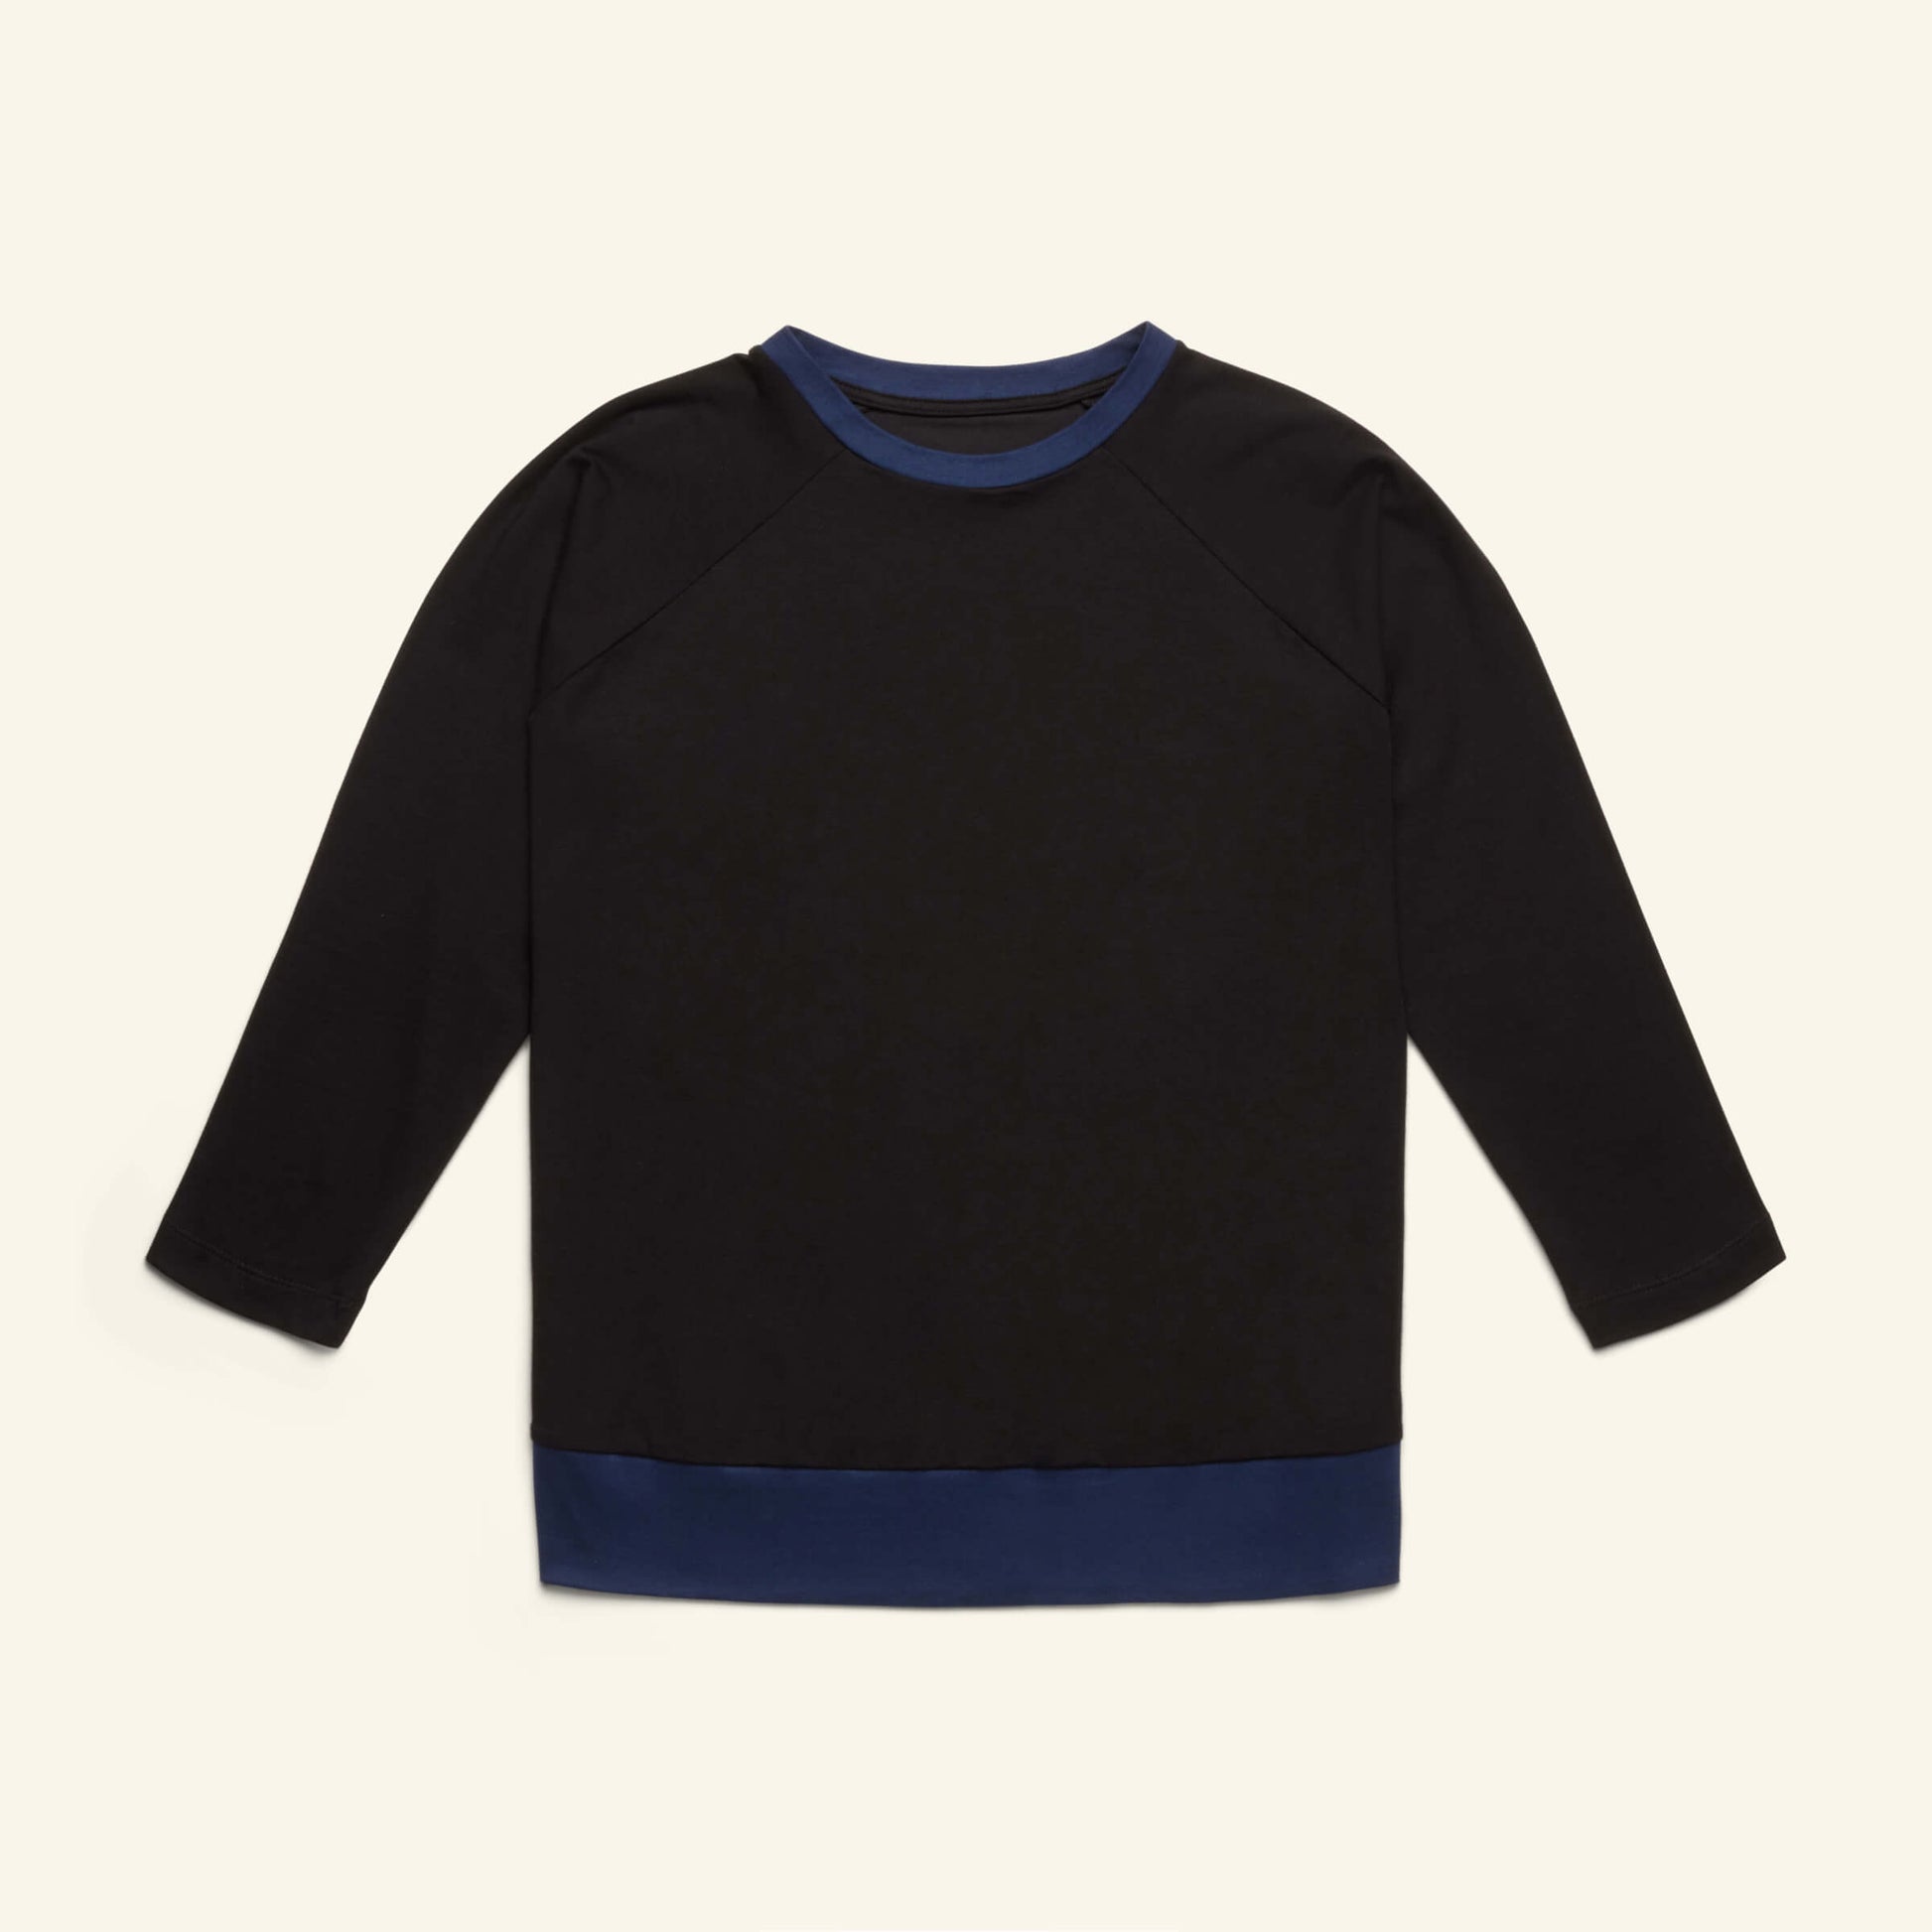 The Slumber Cloud Essential Raglan Long Sleeve made with Outlast temperature regulation technology